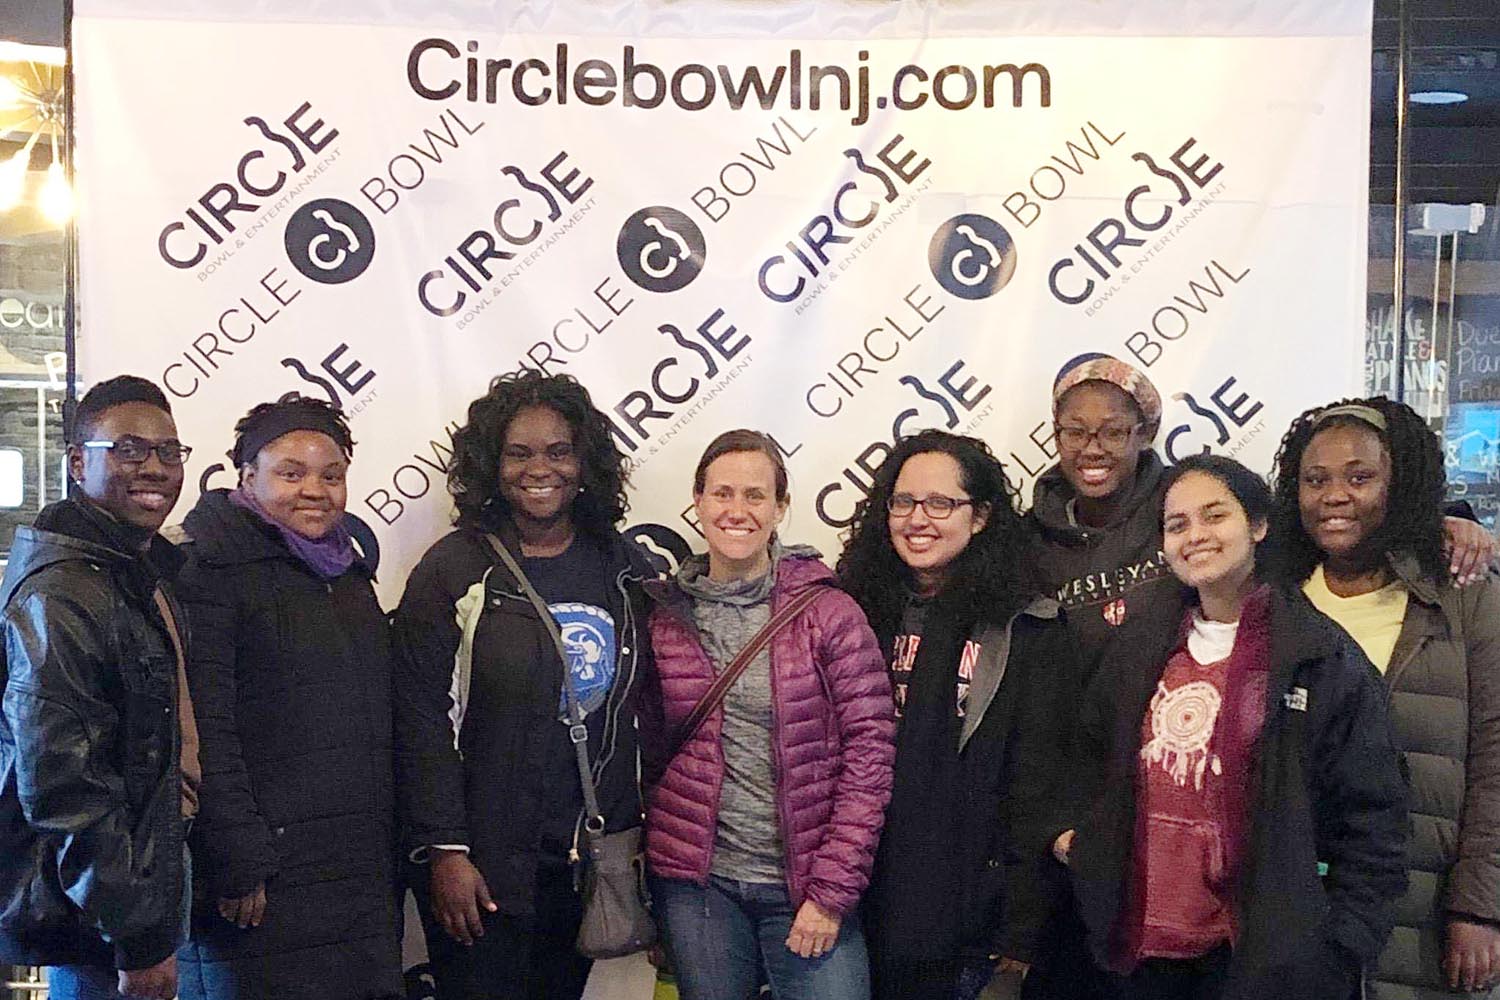 The group played a few rounds of bowling at Circle Bowl in Ledgewood, N.J. 